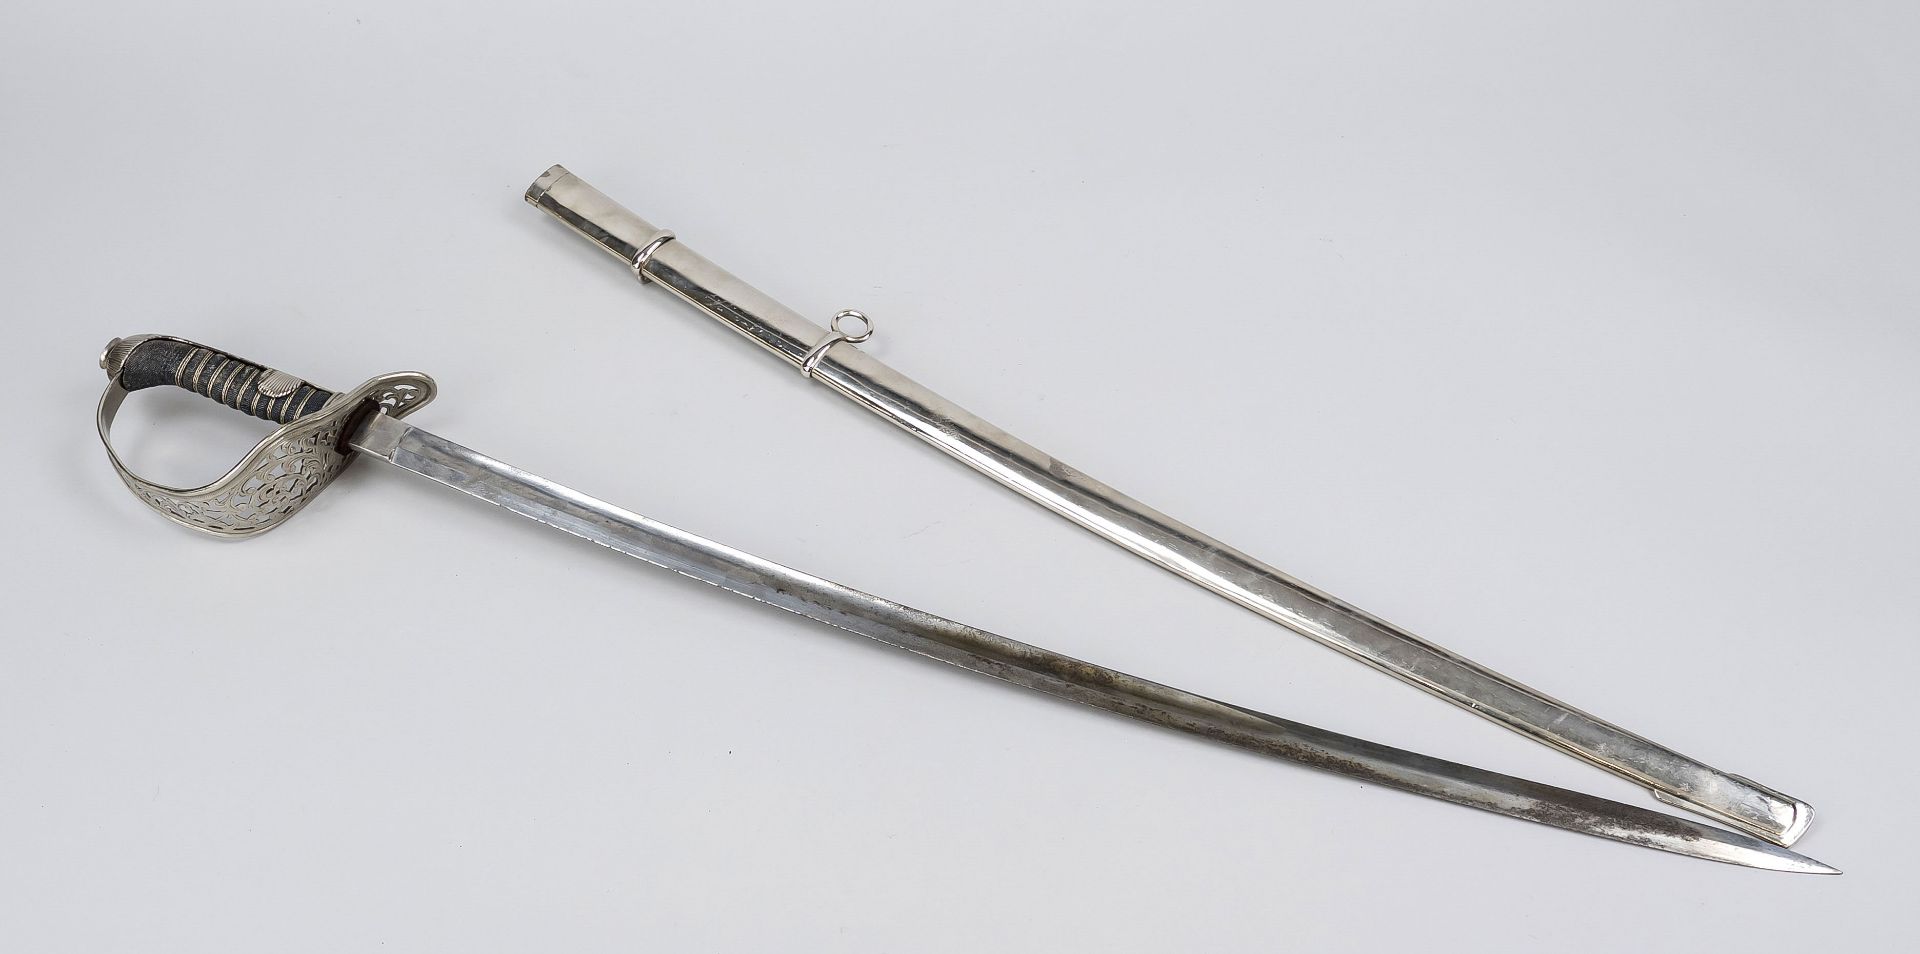 A sabre for officers of the k.u.k. Cavalry, mid-19th century, nickel-plated iron, blade slightly